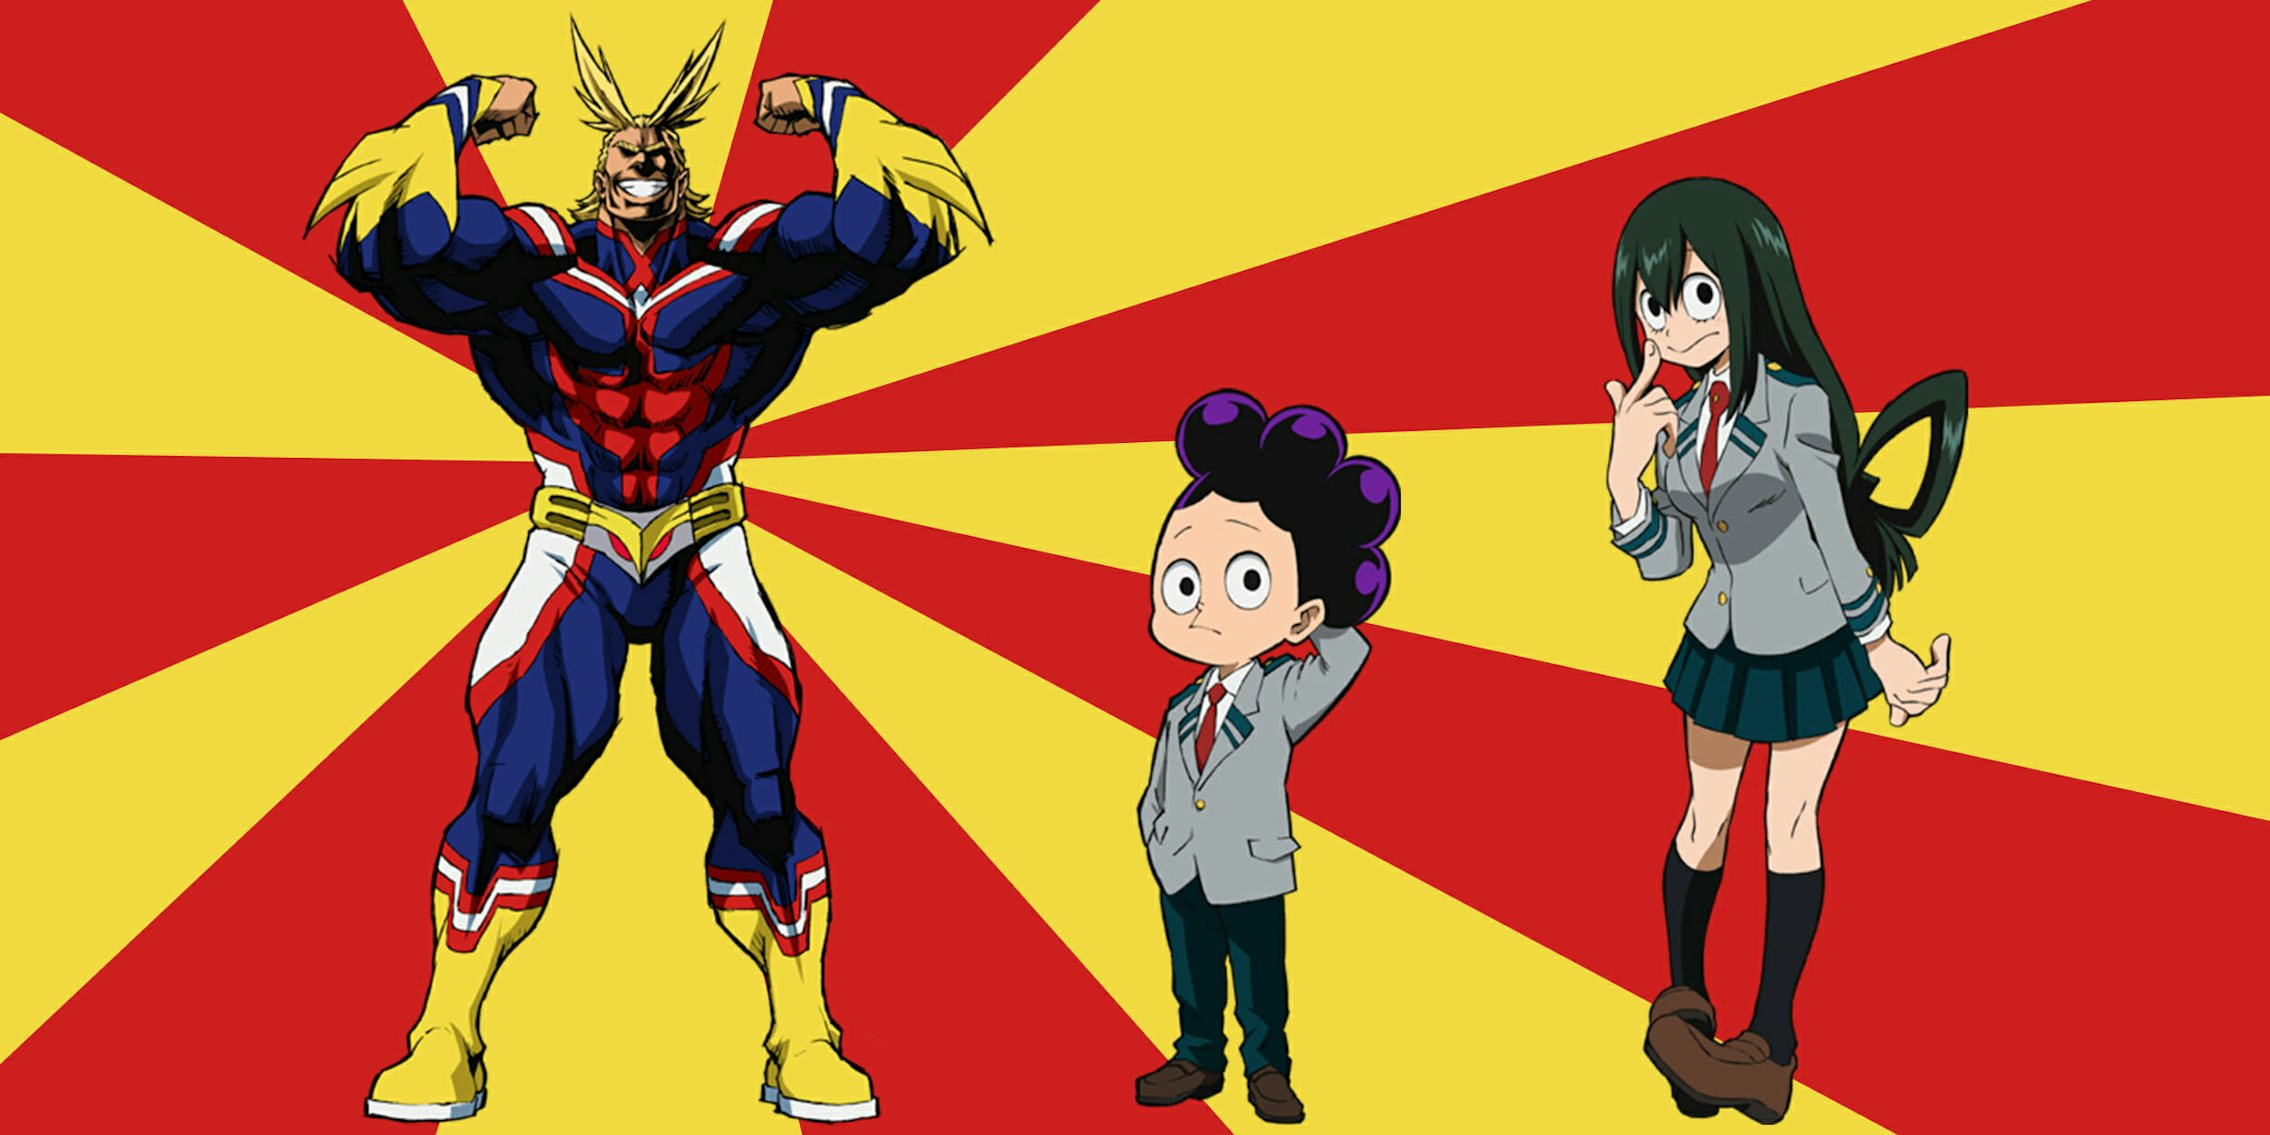 45 My Hero Academia Characters Ranked From Worst To Best